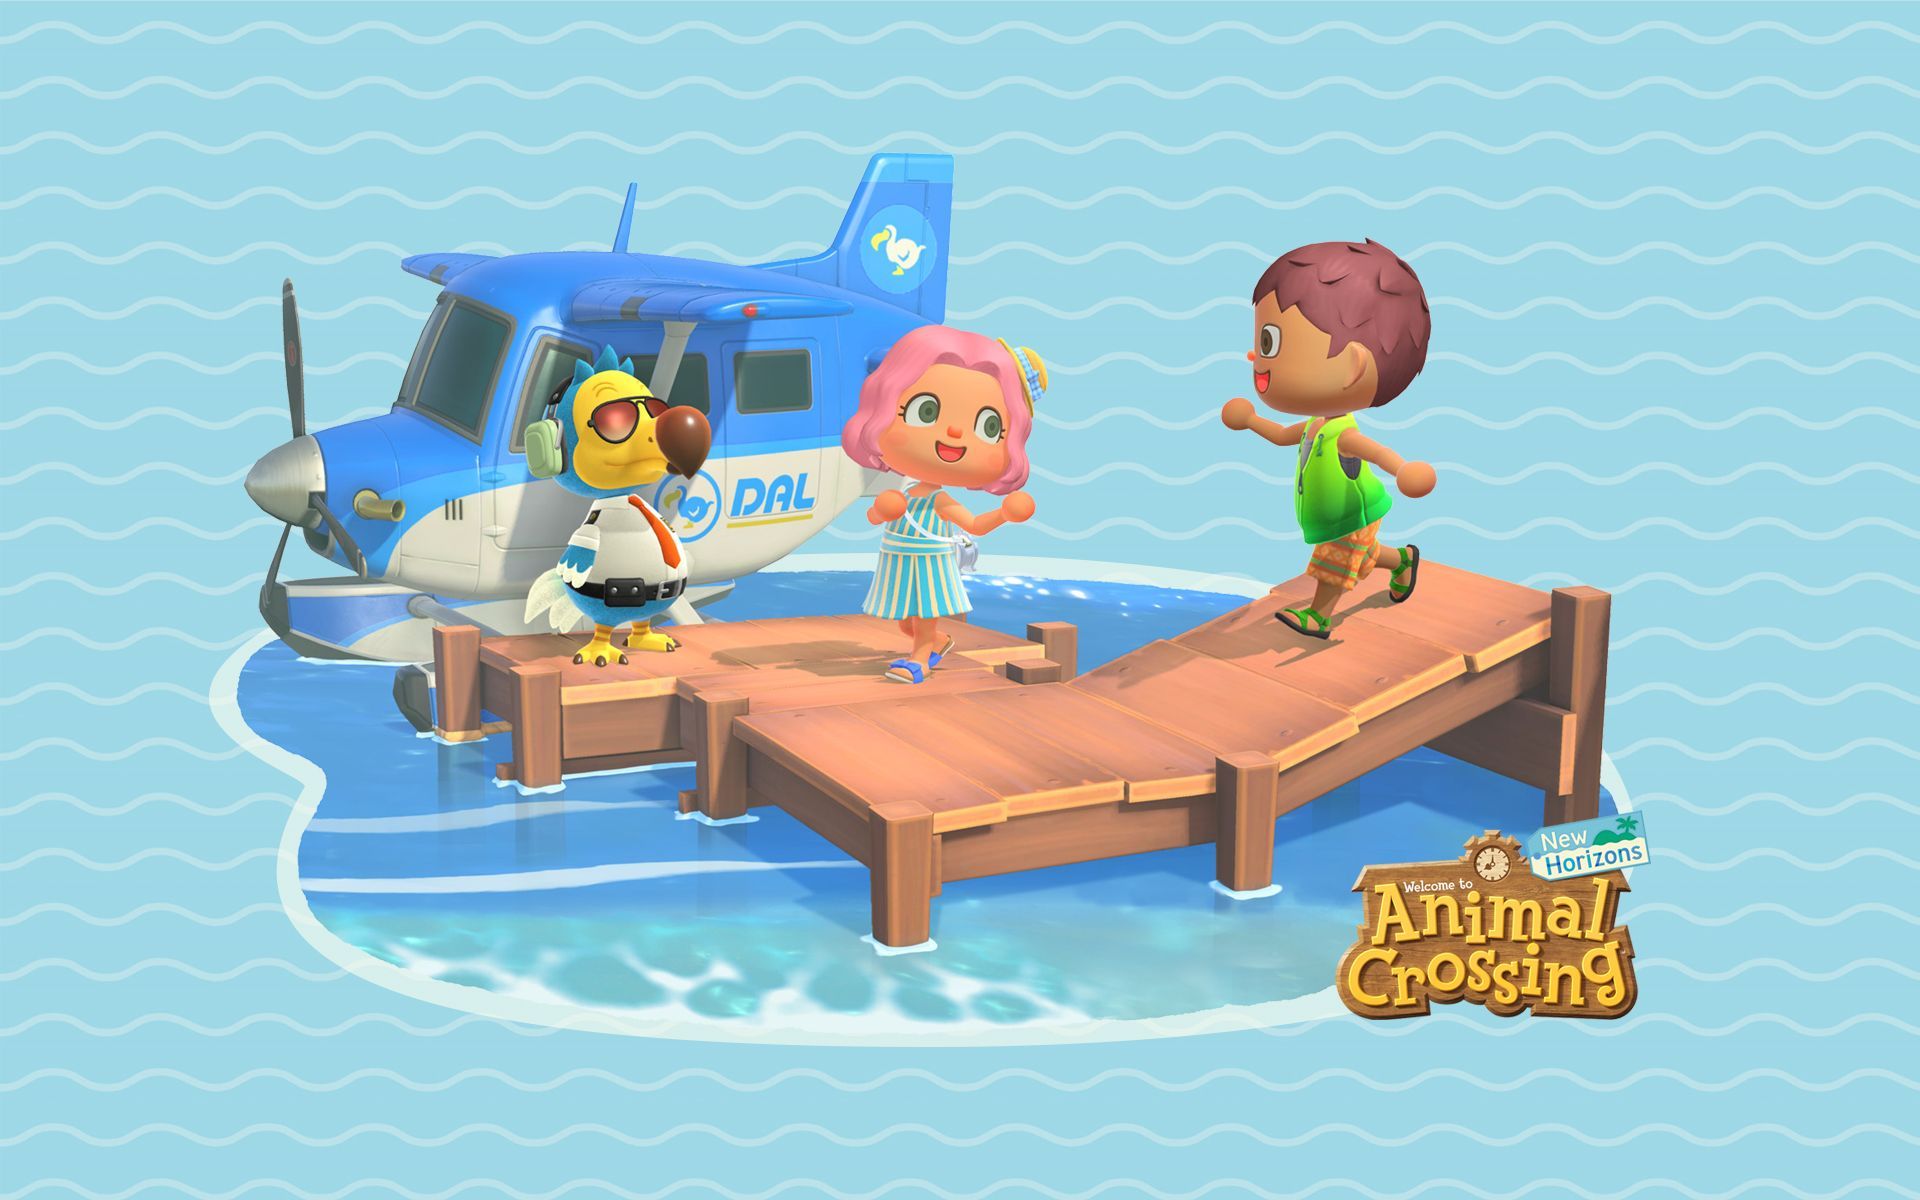 Animal Crossing New Horizons Dodo Airlines Wallpaper with Monocle